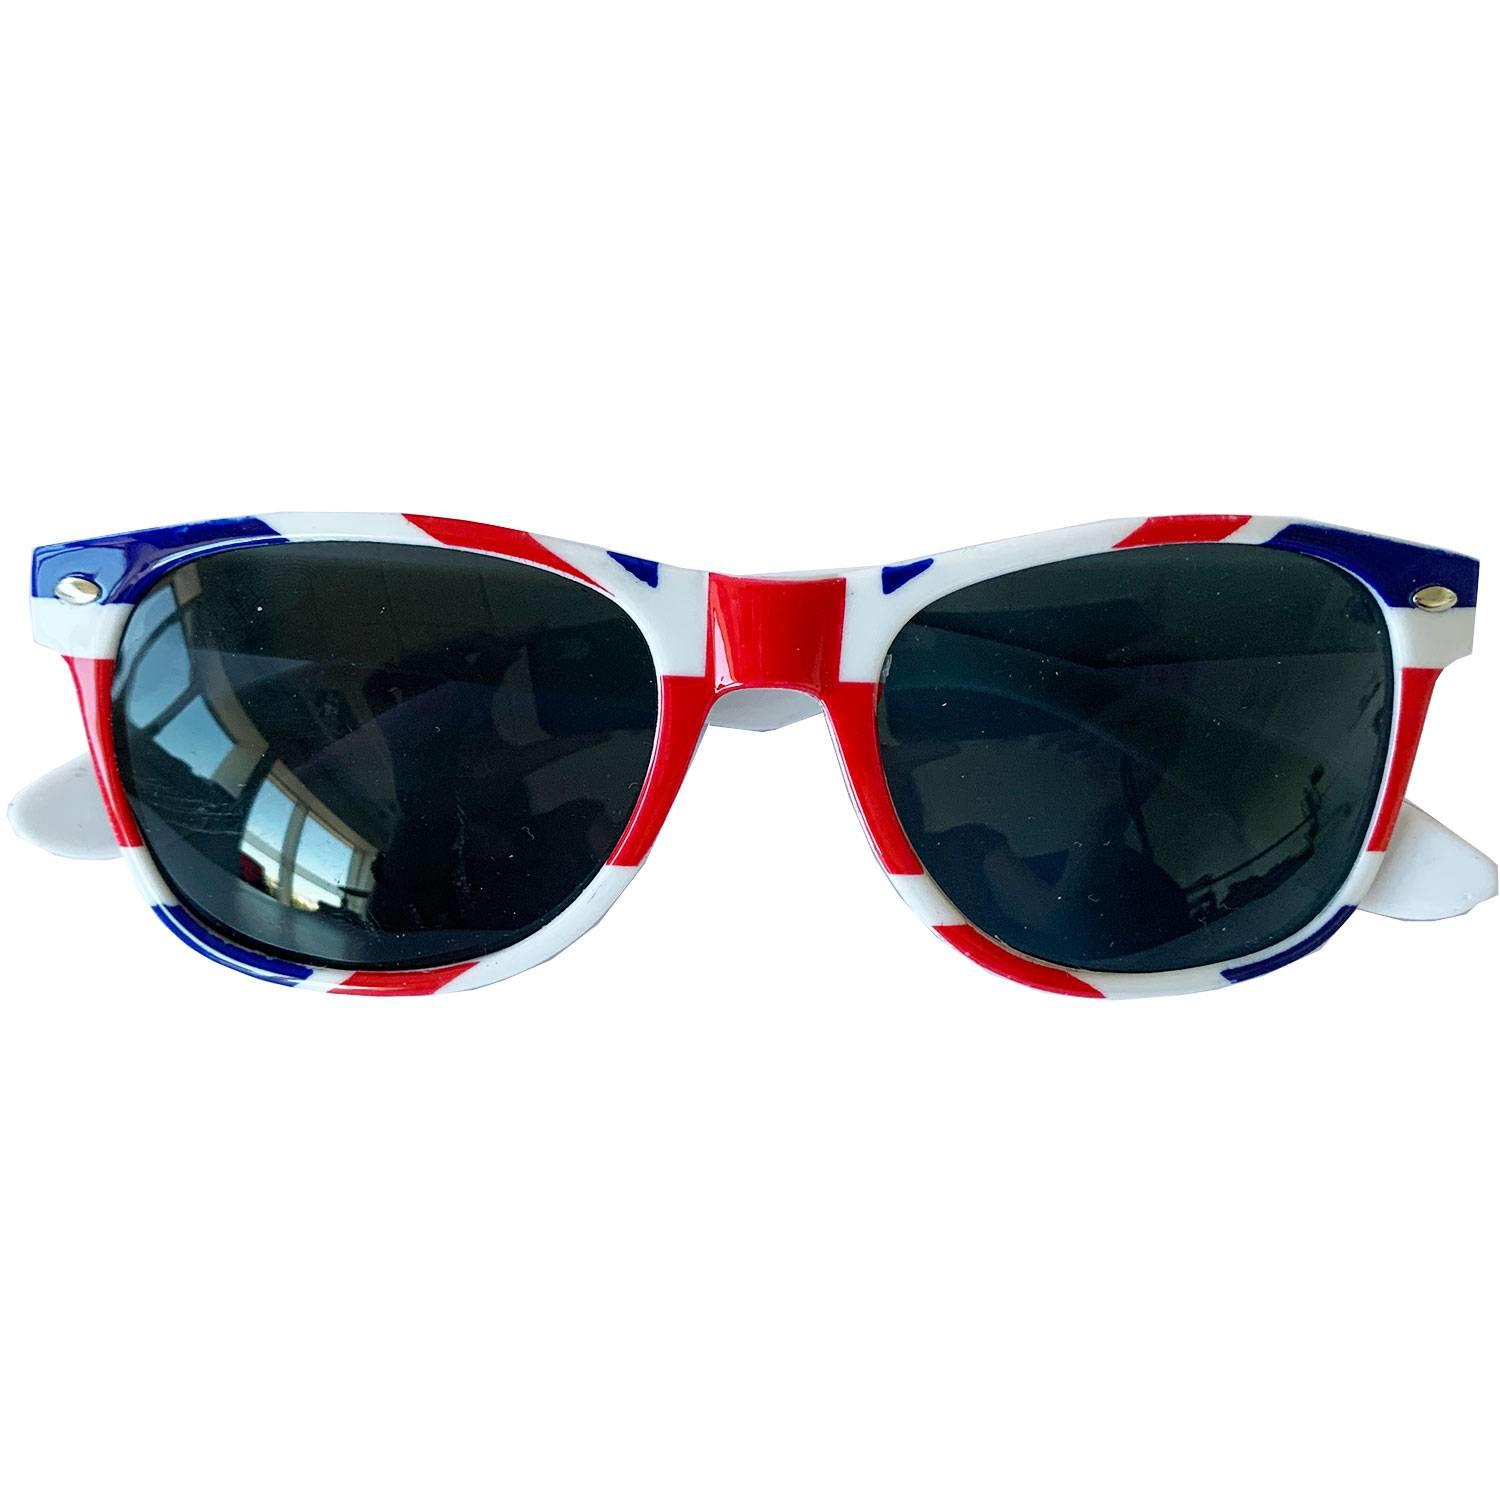 Great Britain sunglasses for Royal Jubilee by Amscan 9913055 available here at Karnival Costumes online party shop